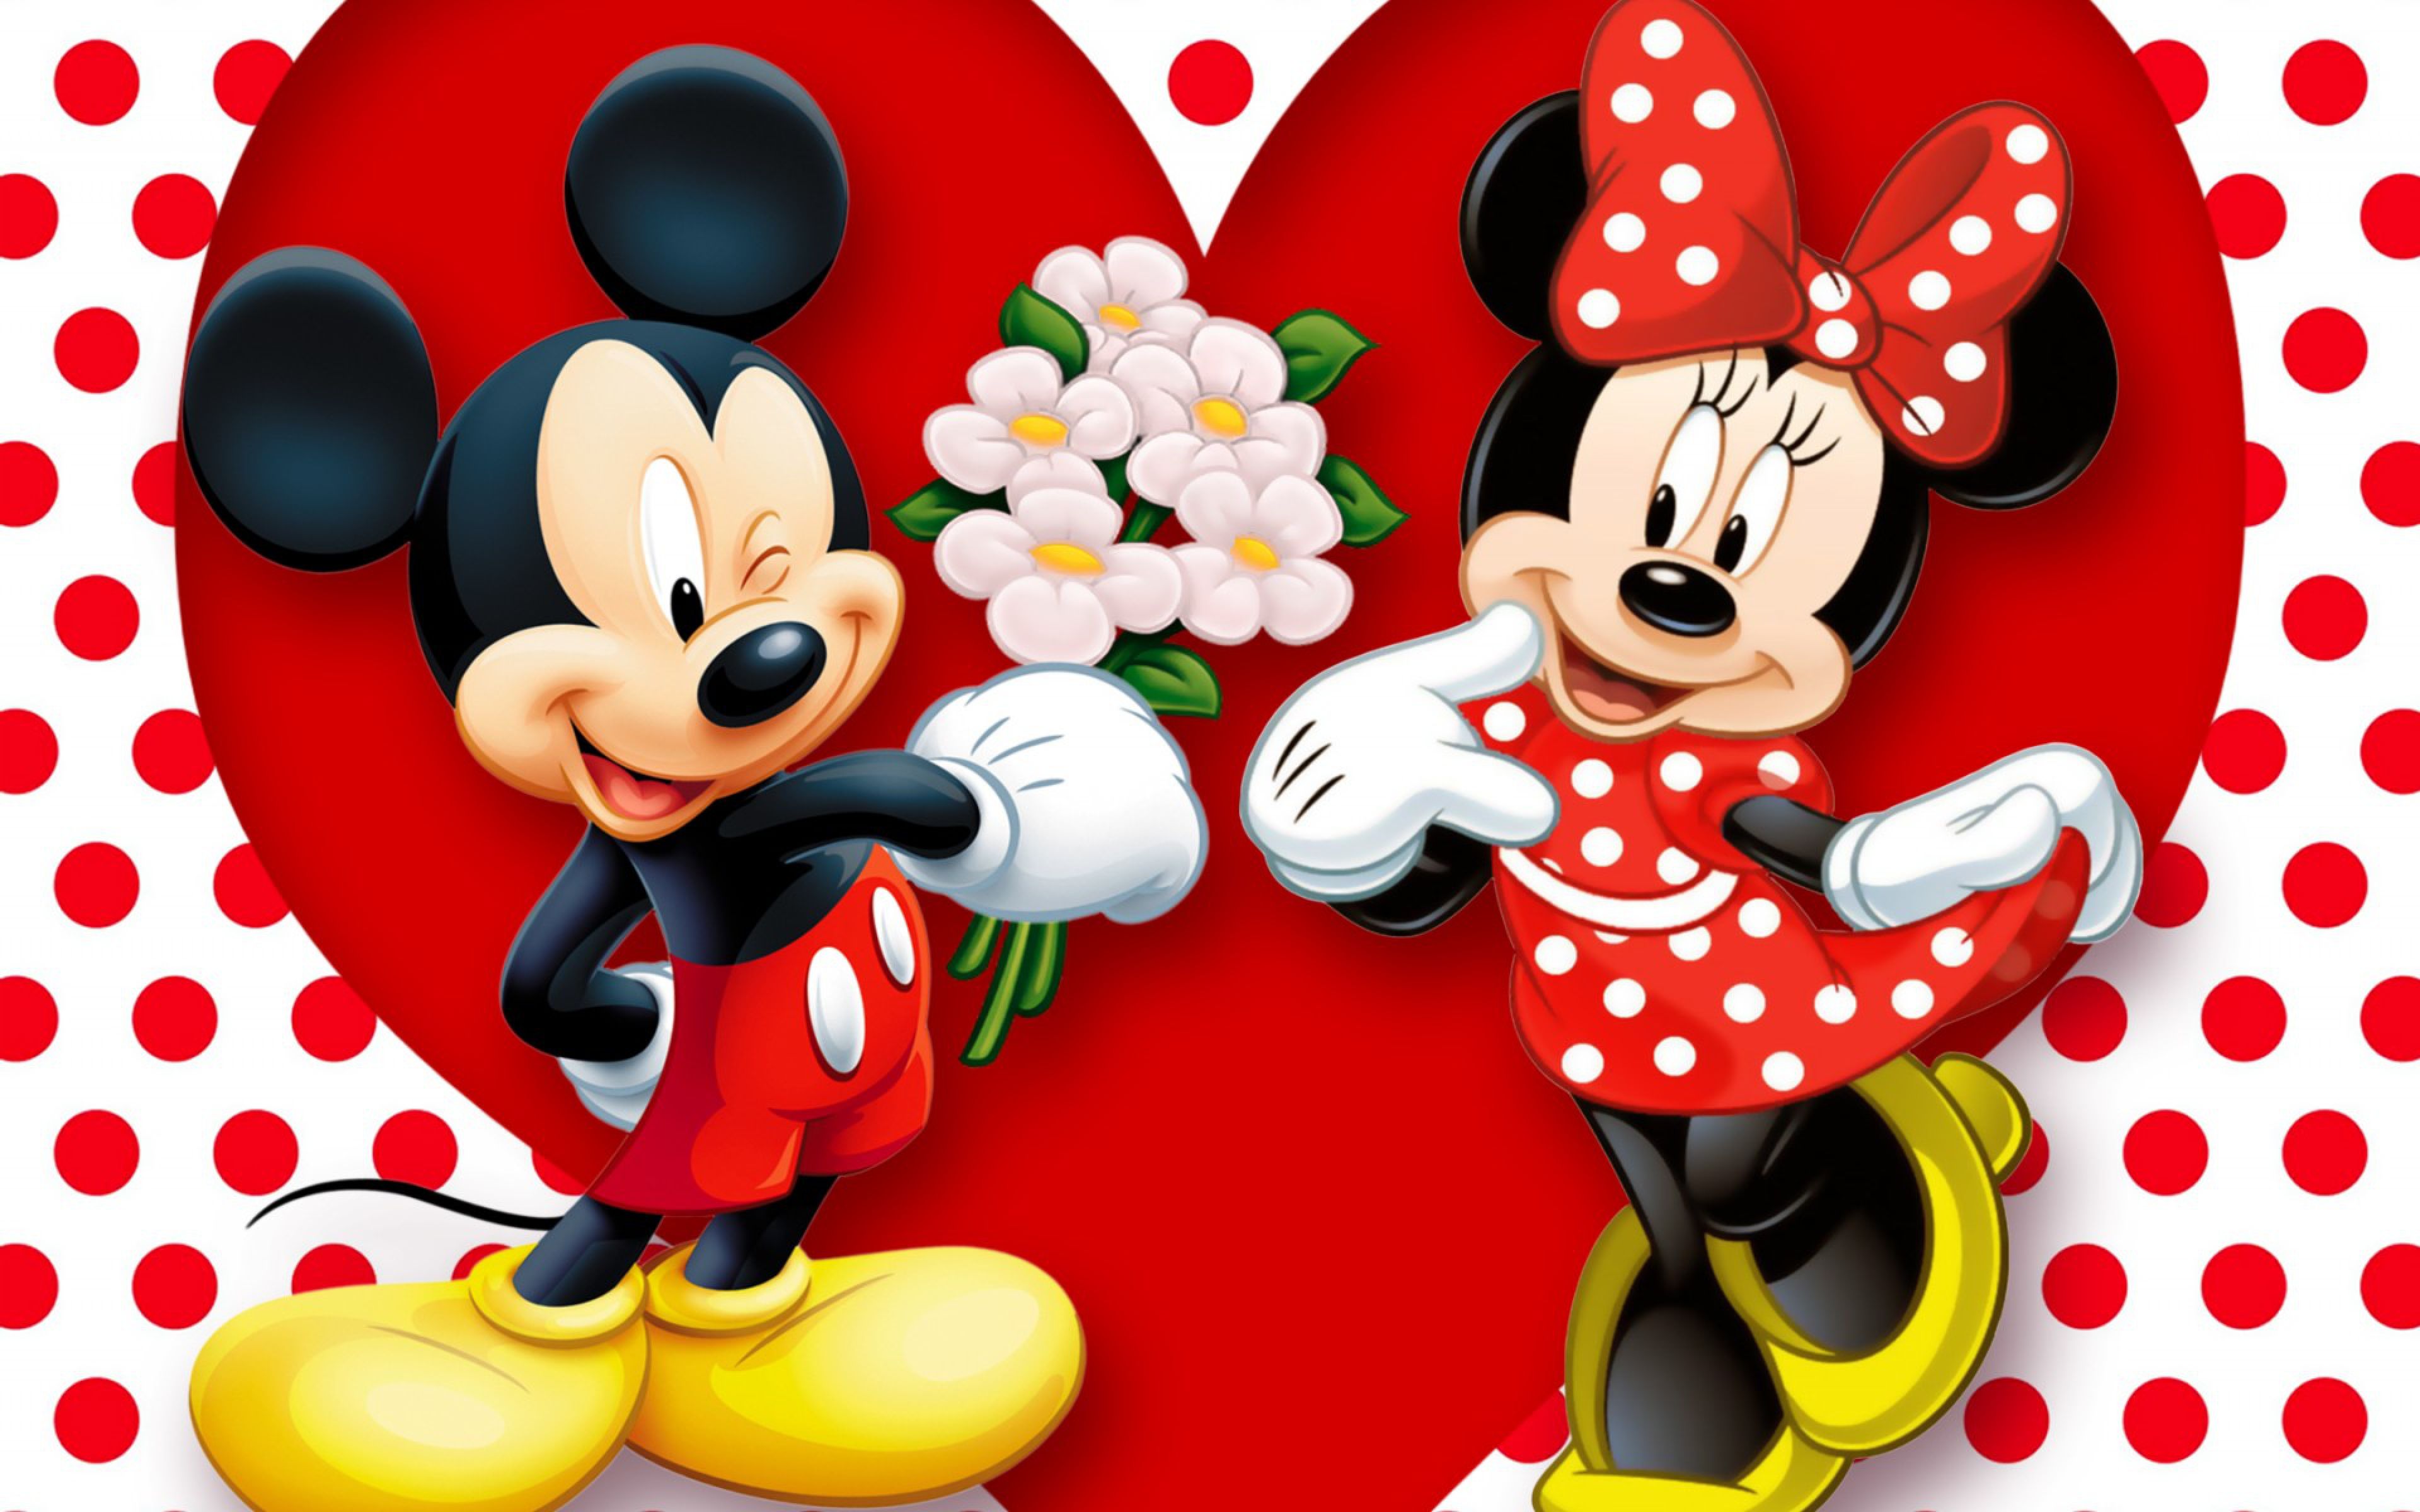 Miney Mouse Wallpaper. Mickey Mouse